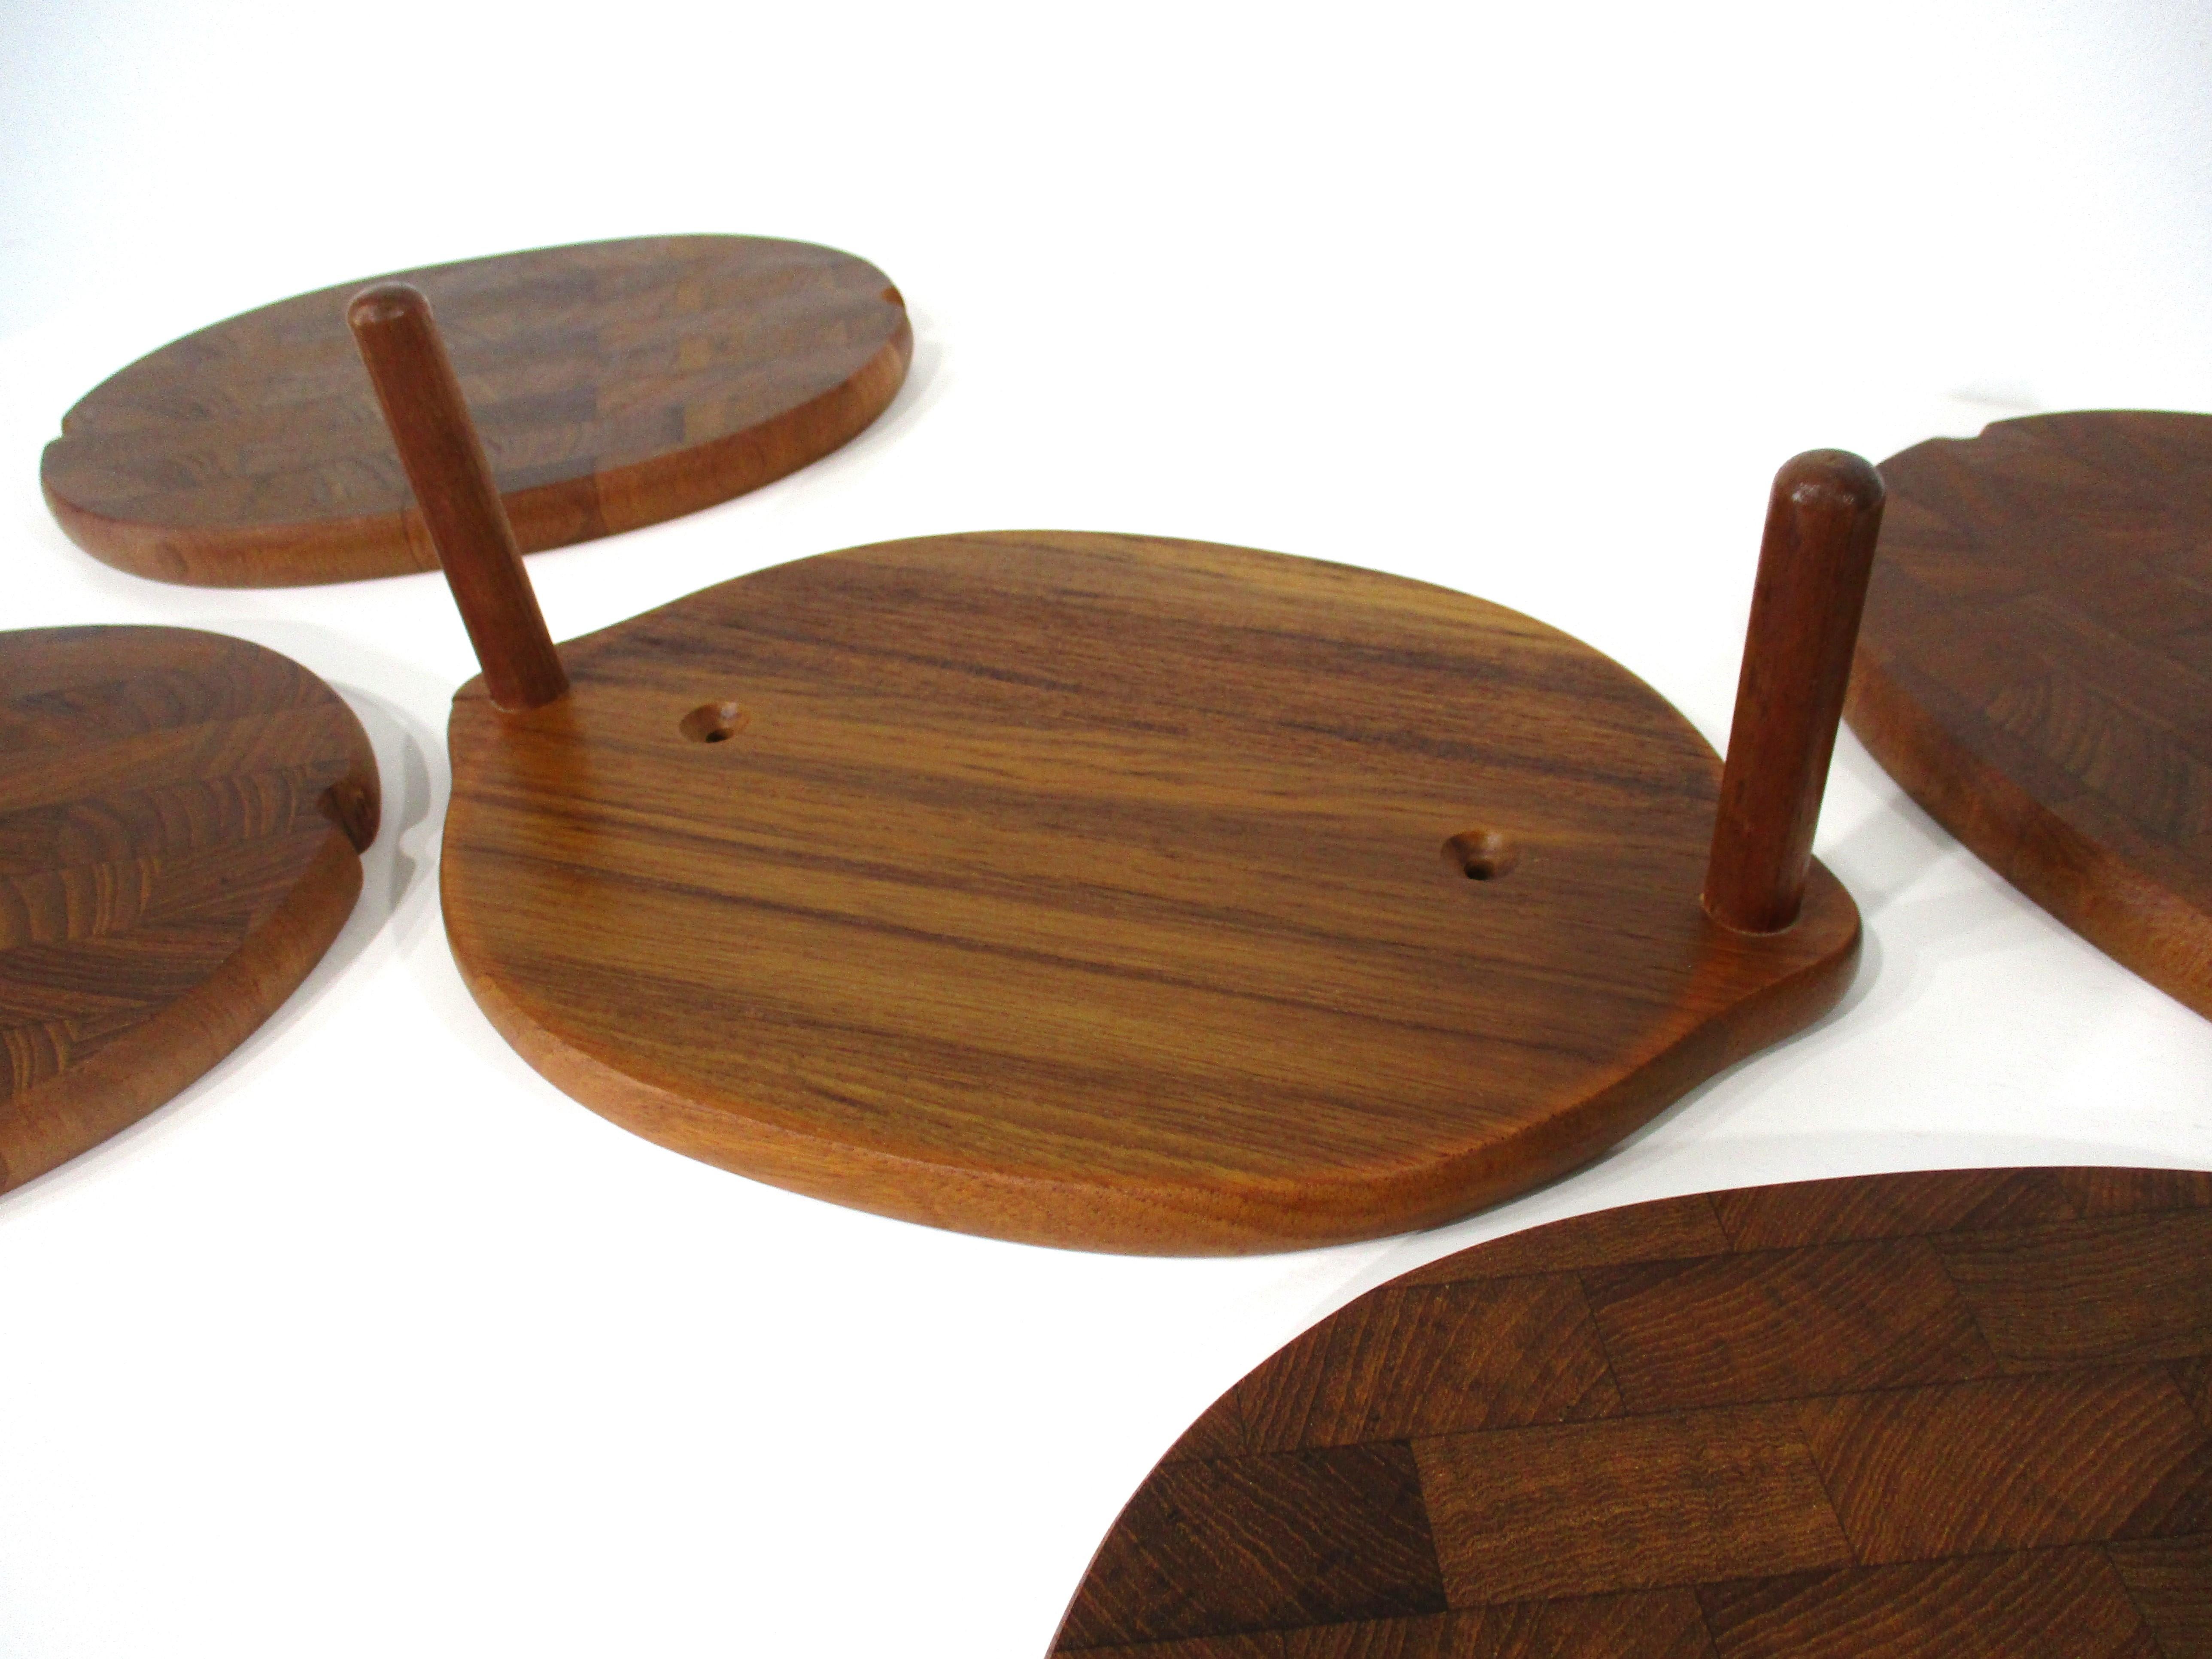 Danish Individual Teak Charcuterie Serving Trays with Holder by Digsmed Denmark